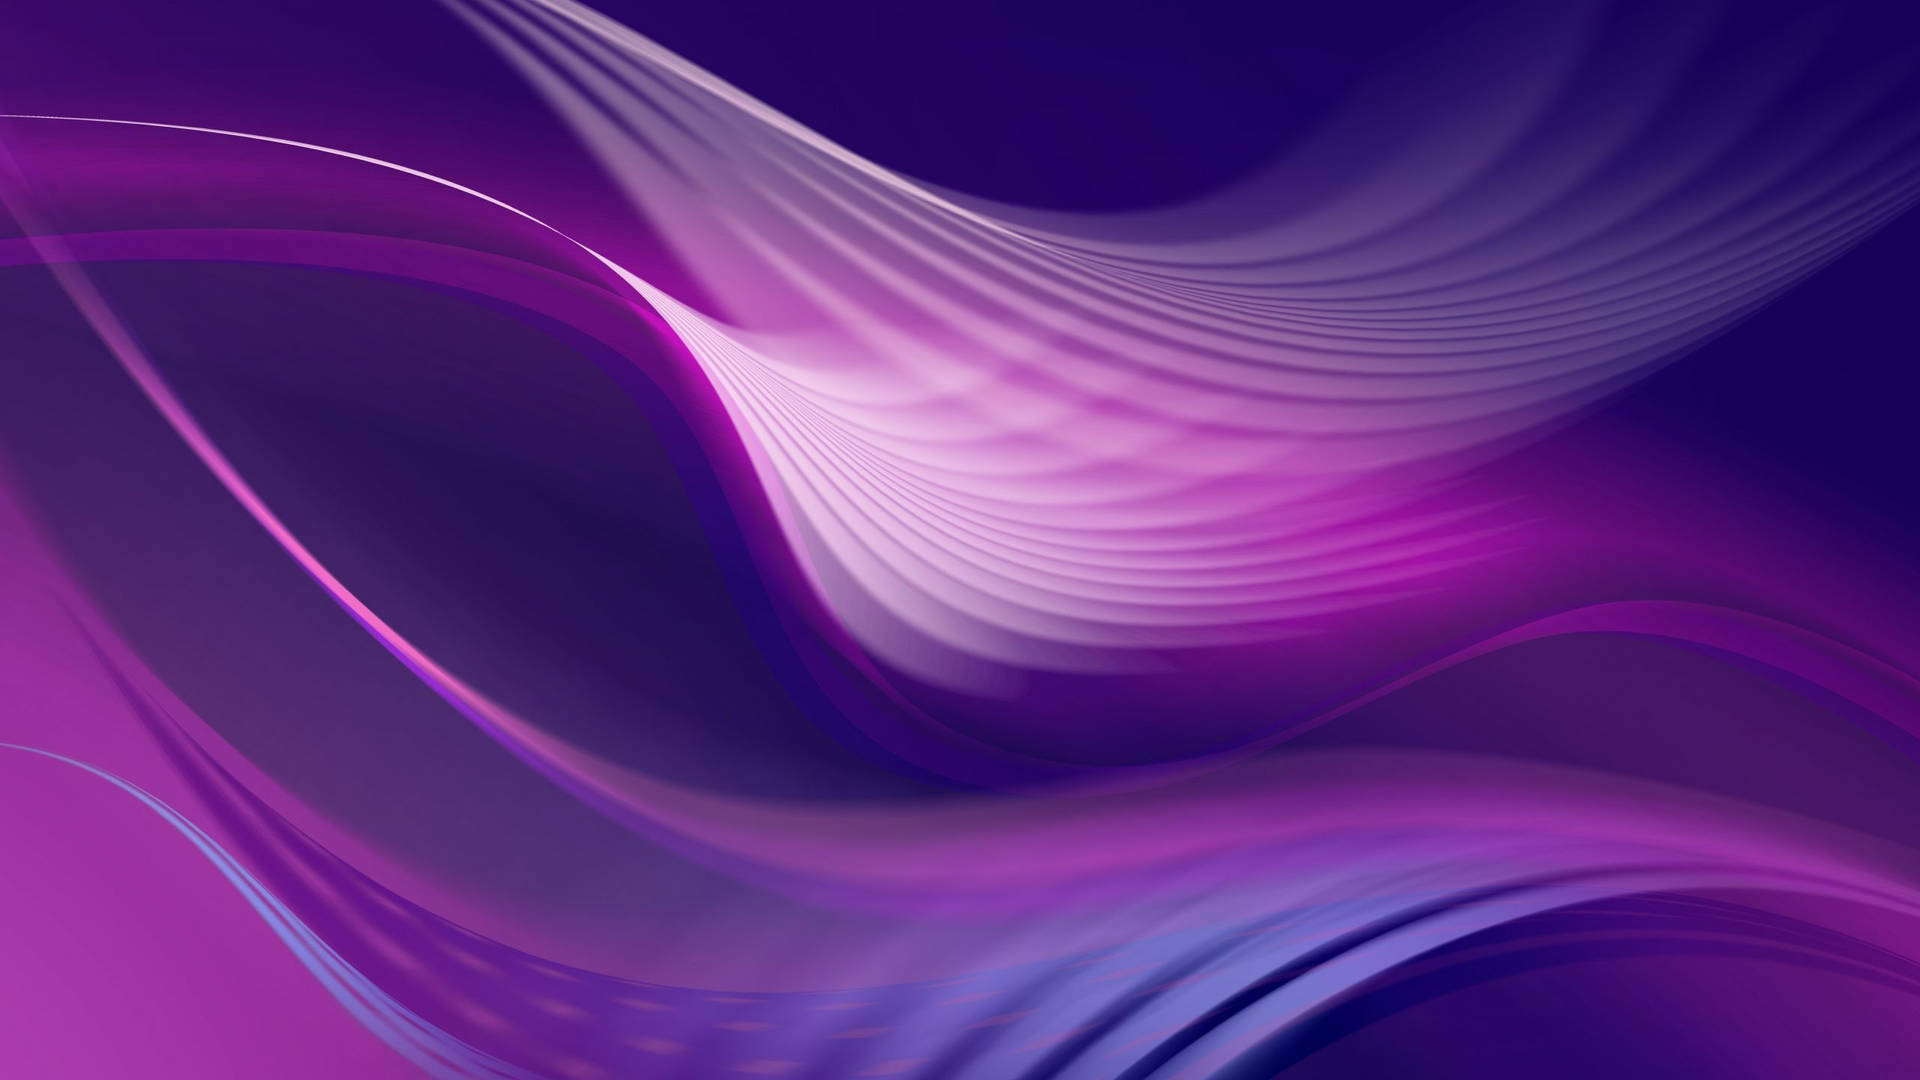 Violet Aesthetic Close-up Abstract Art Wallpaper